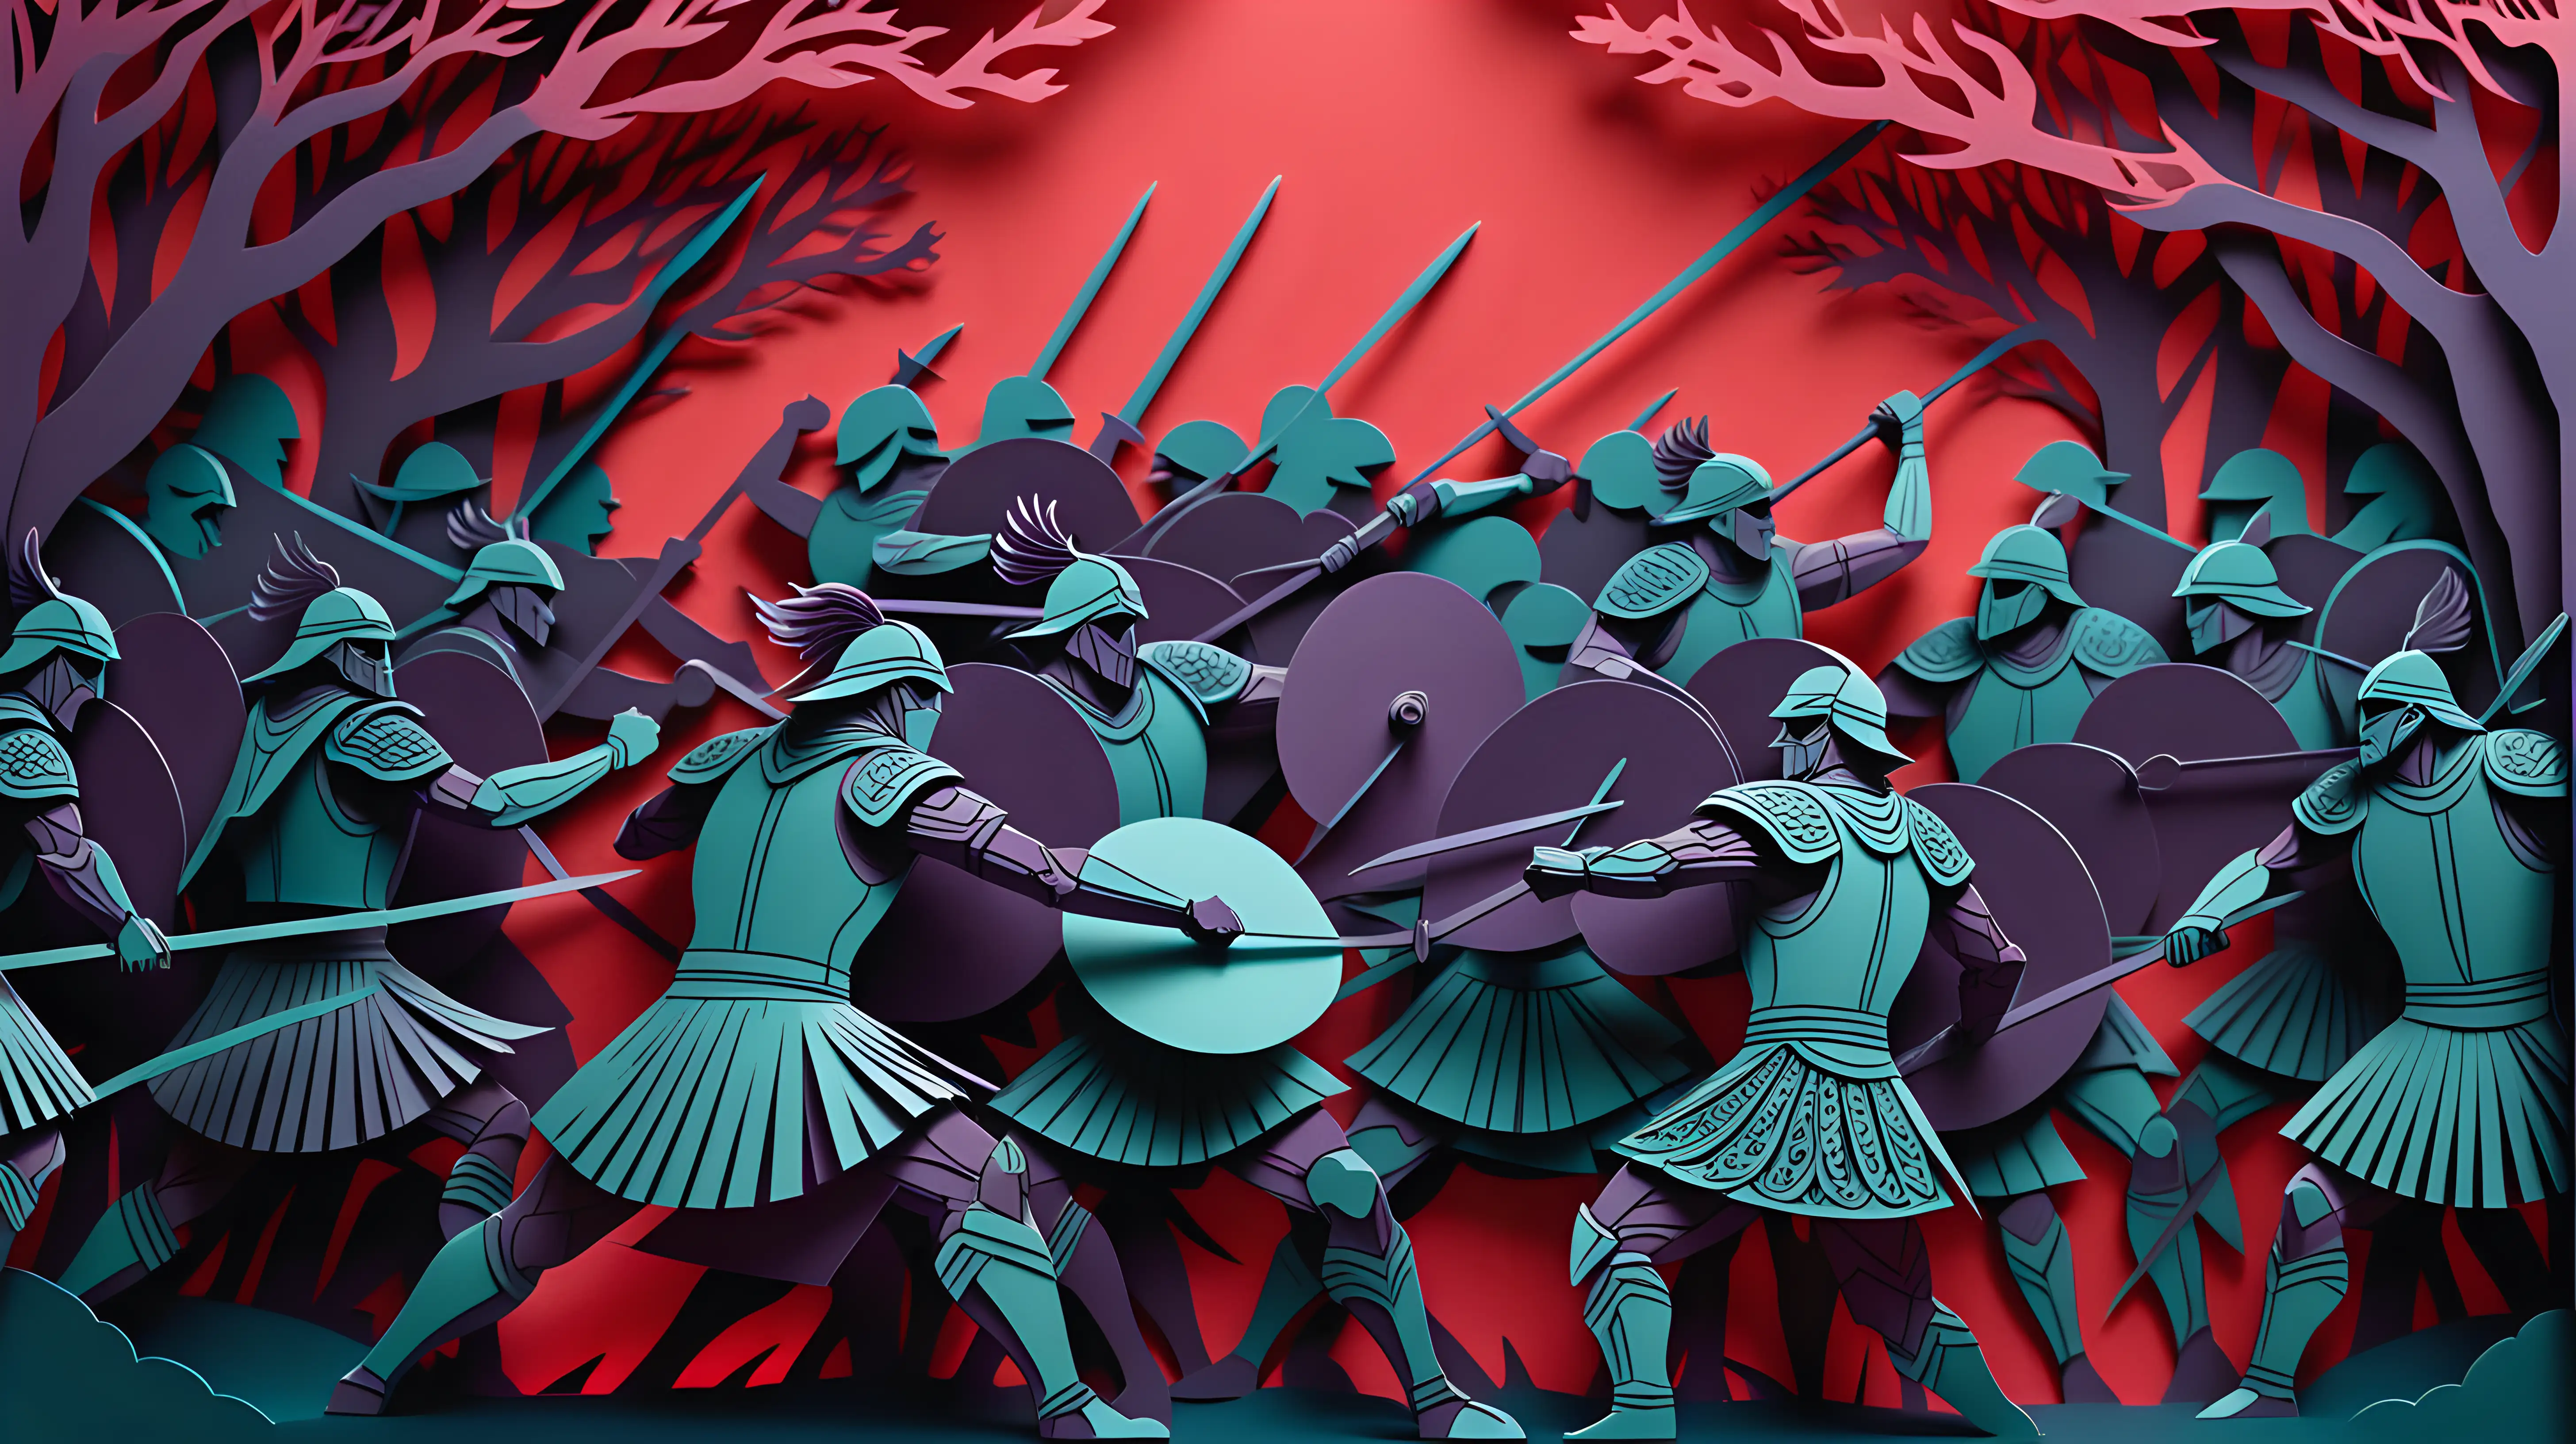 Dark Silhouettes of Warriors Crowd on Red Background Battle Intricate LaserCut Paper Illustration